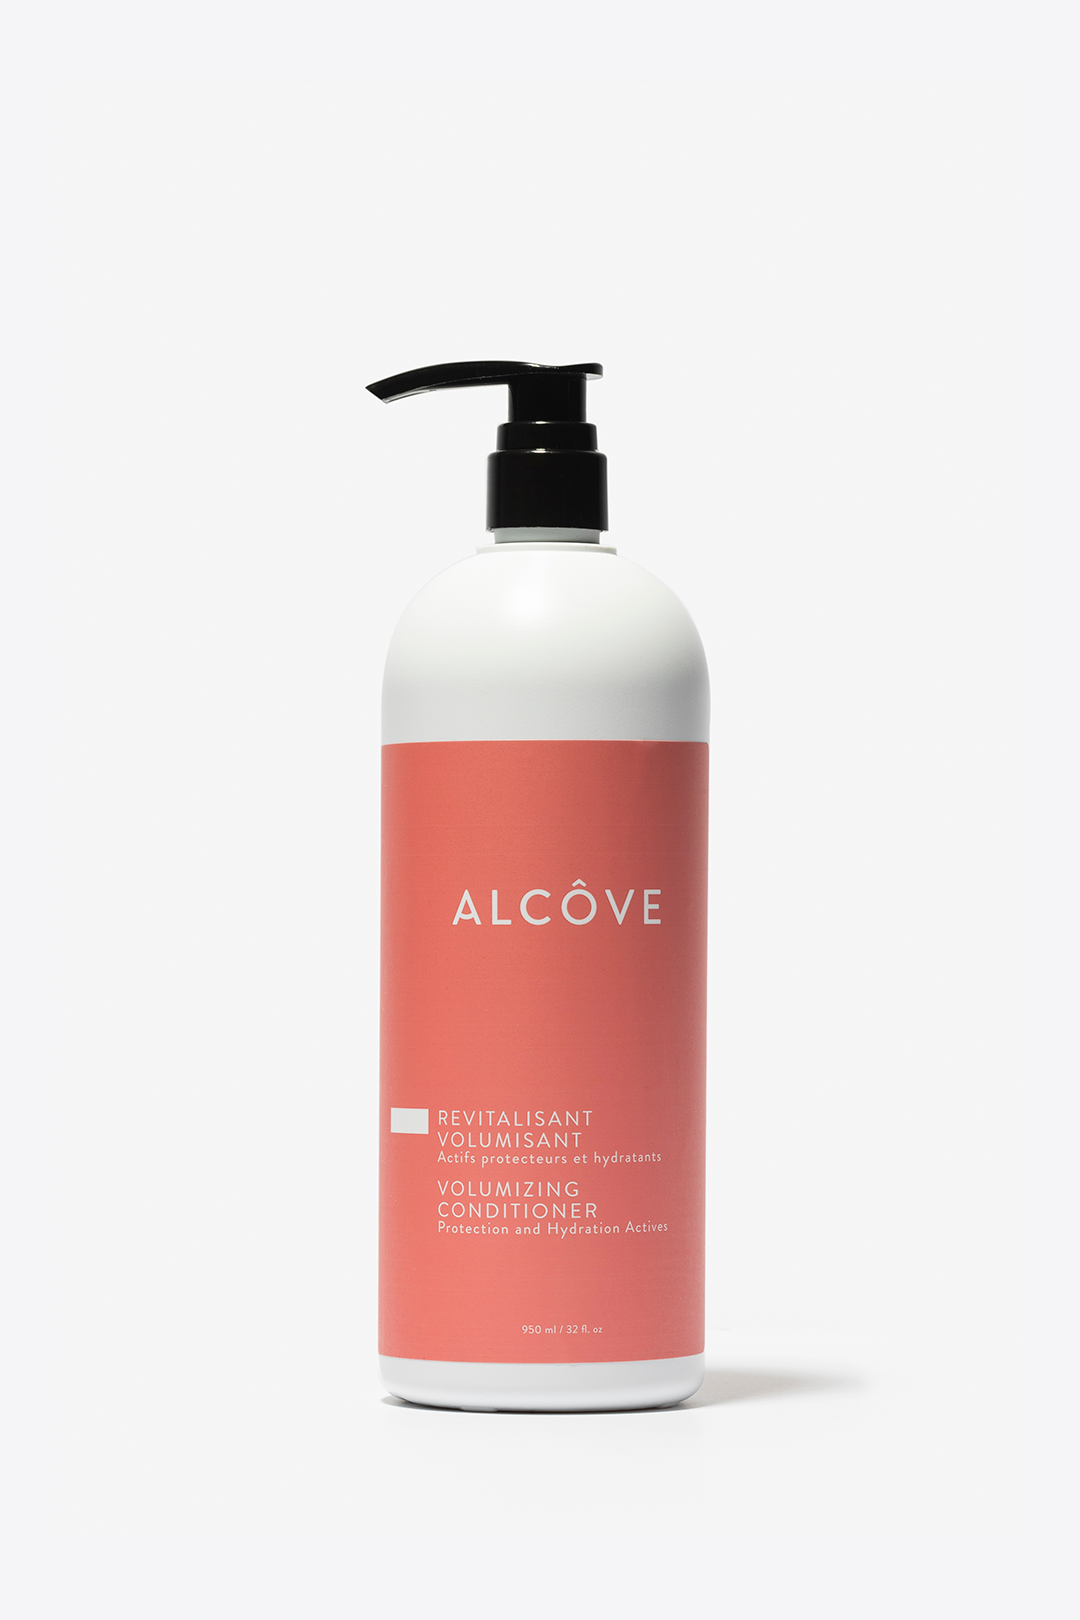 Alcove - VOLUMIZING CONDITIONER - 950ml - ProCare Outlet by Alcove